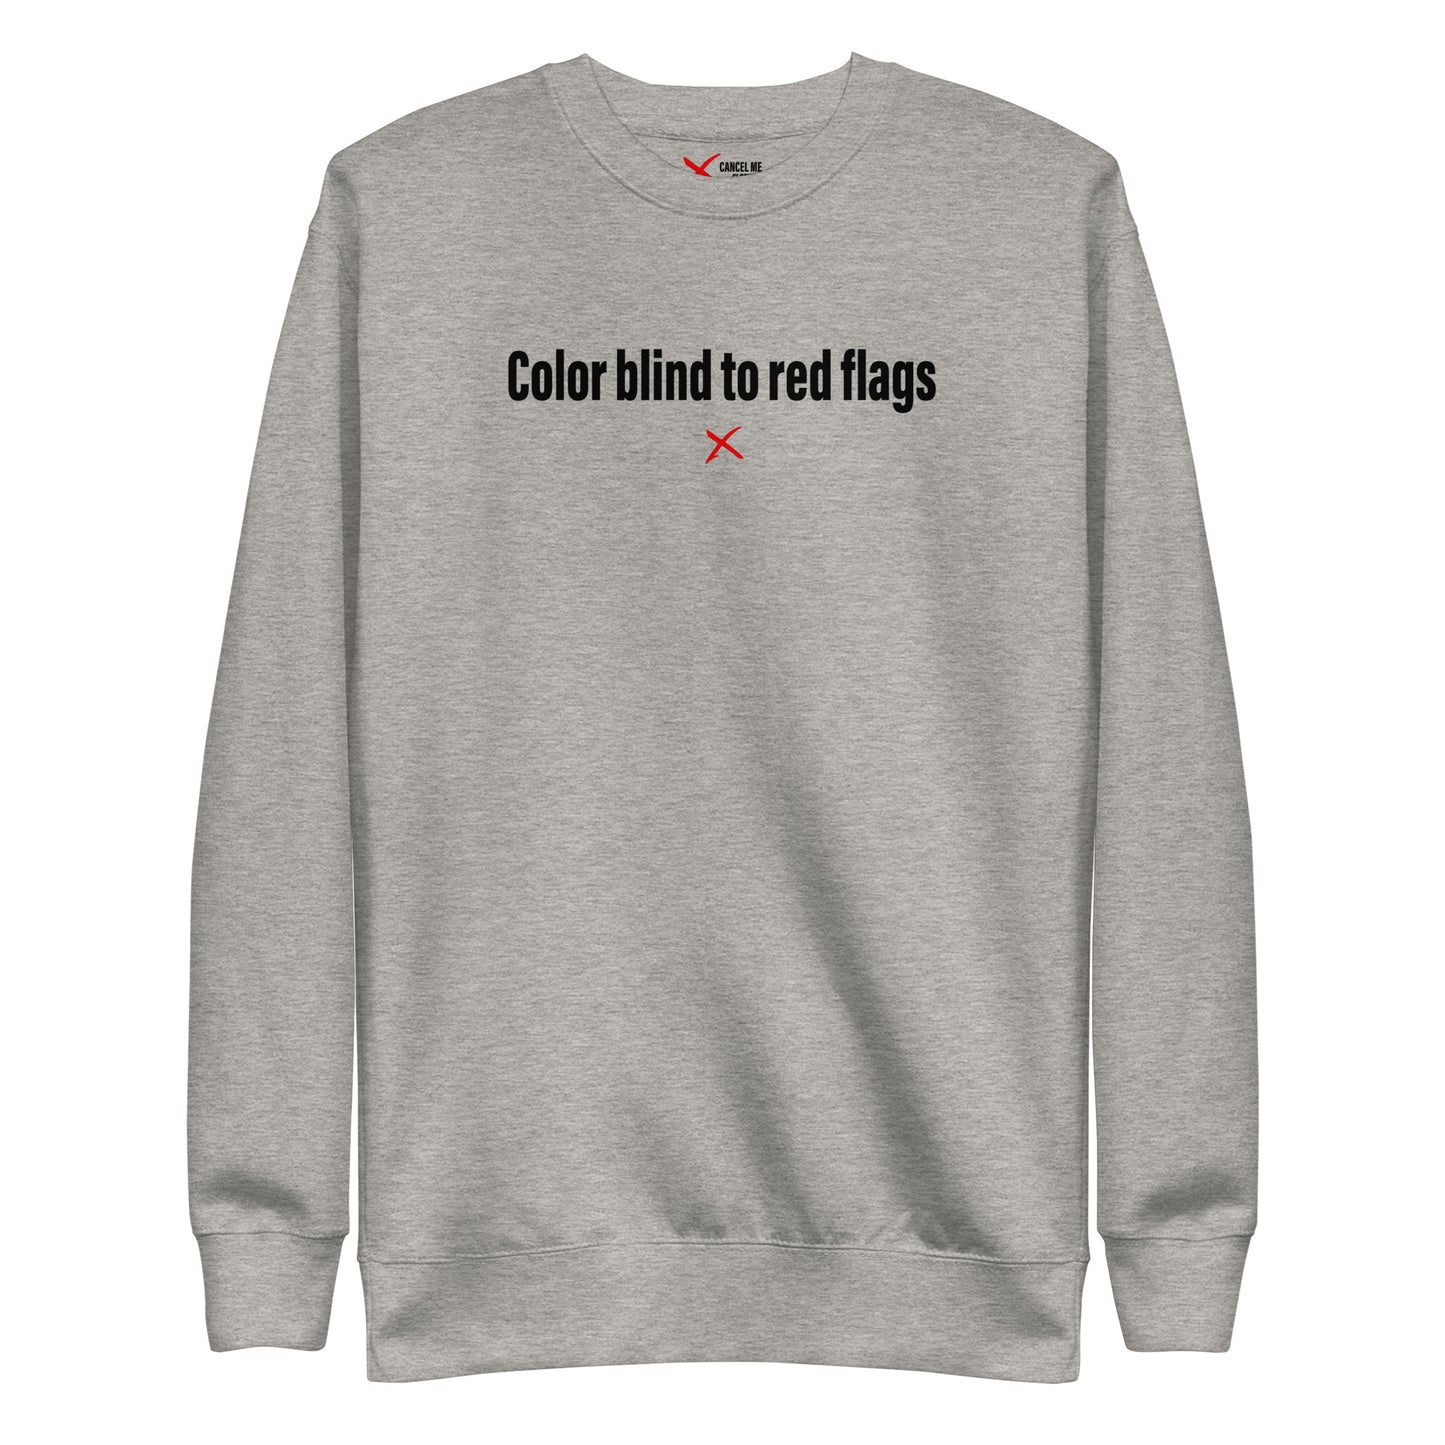 Color blind to red flags - Sweatshirt